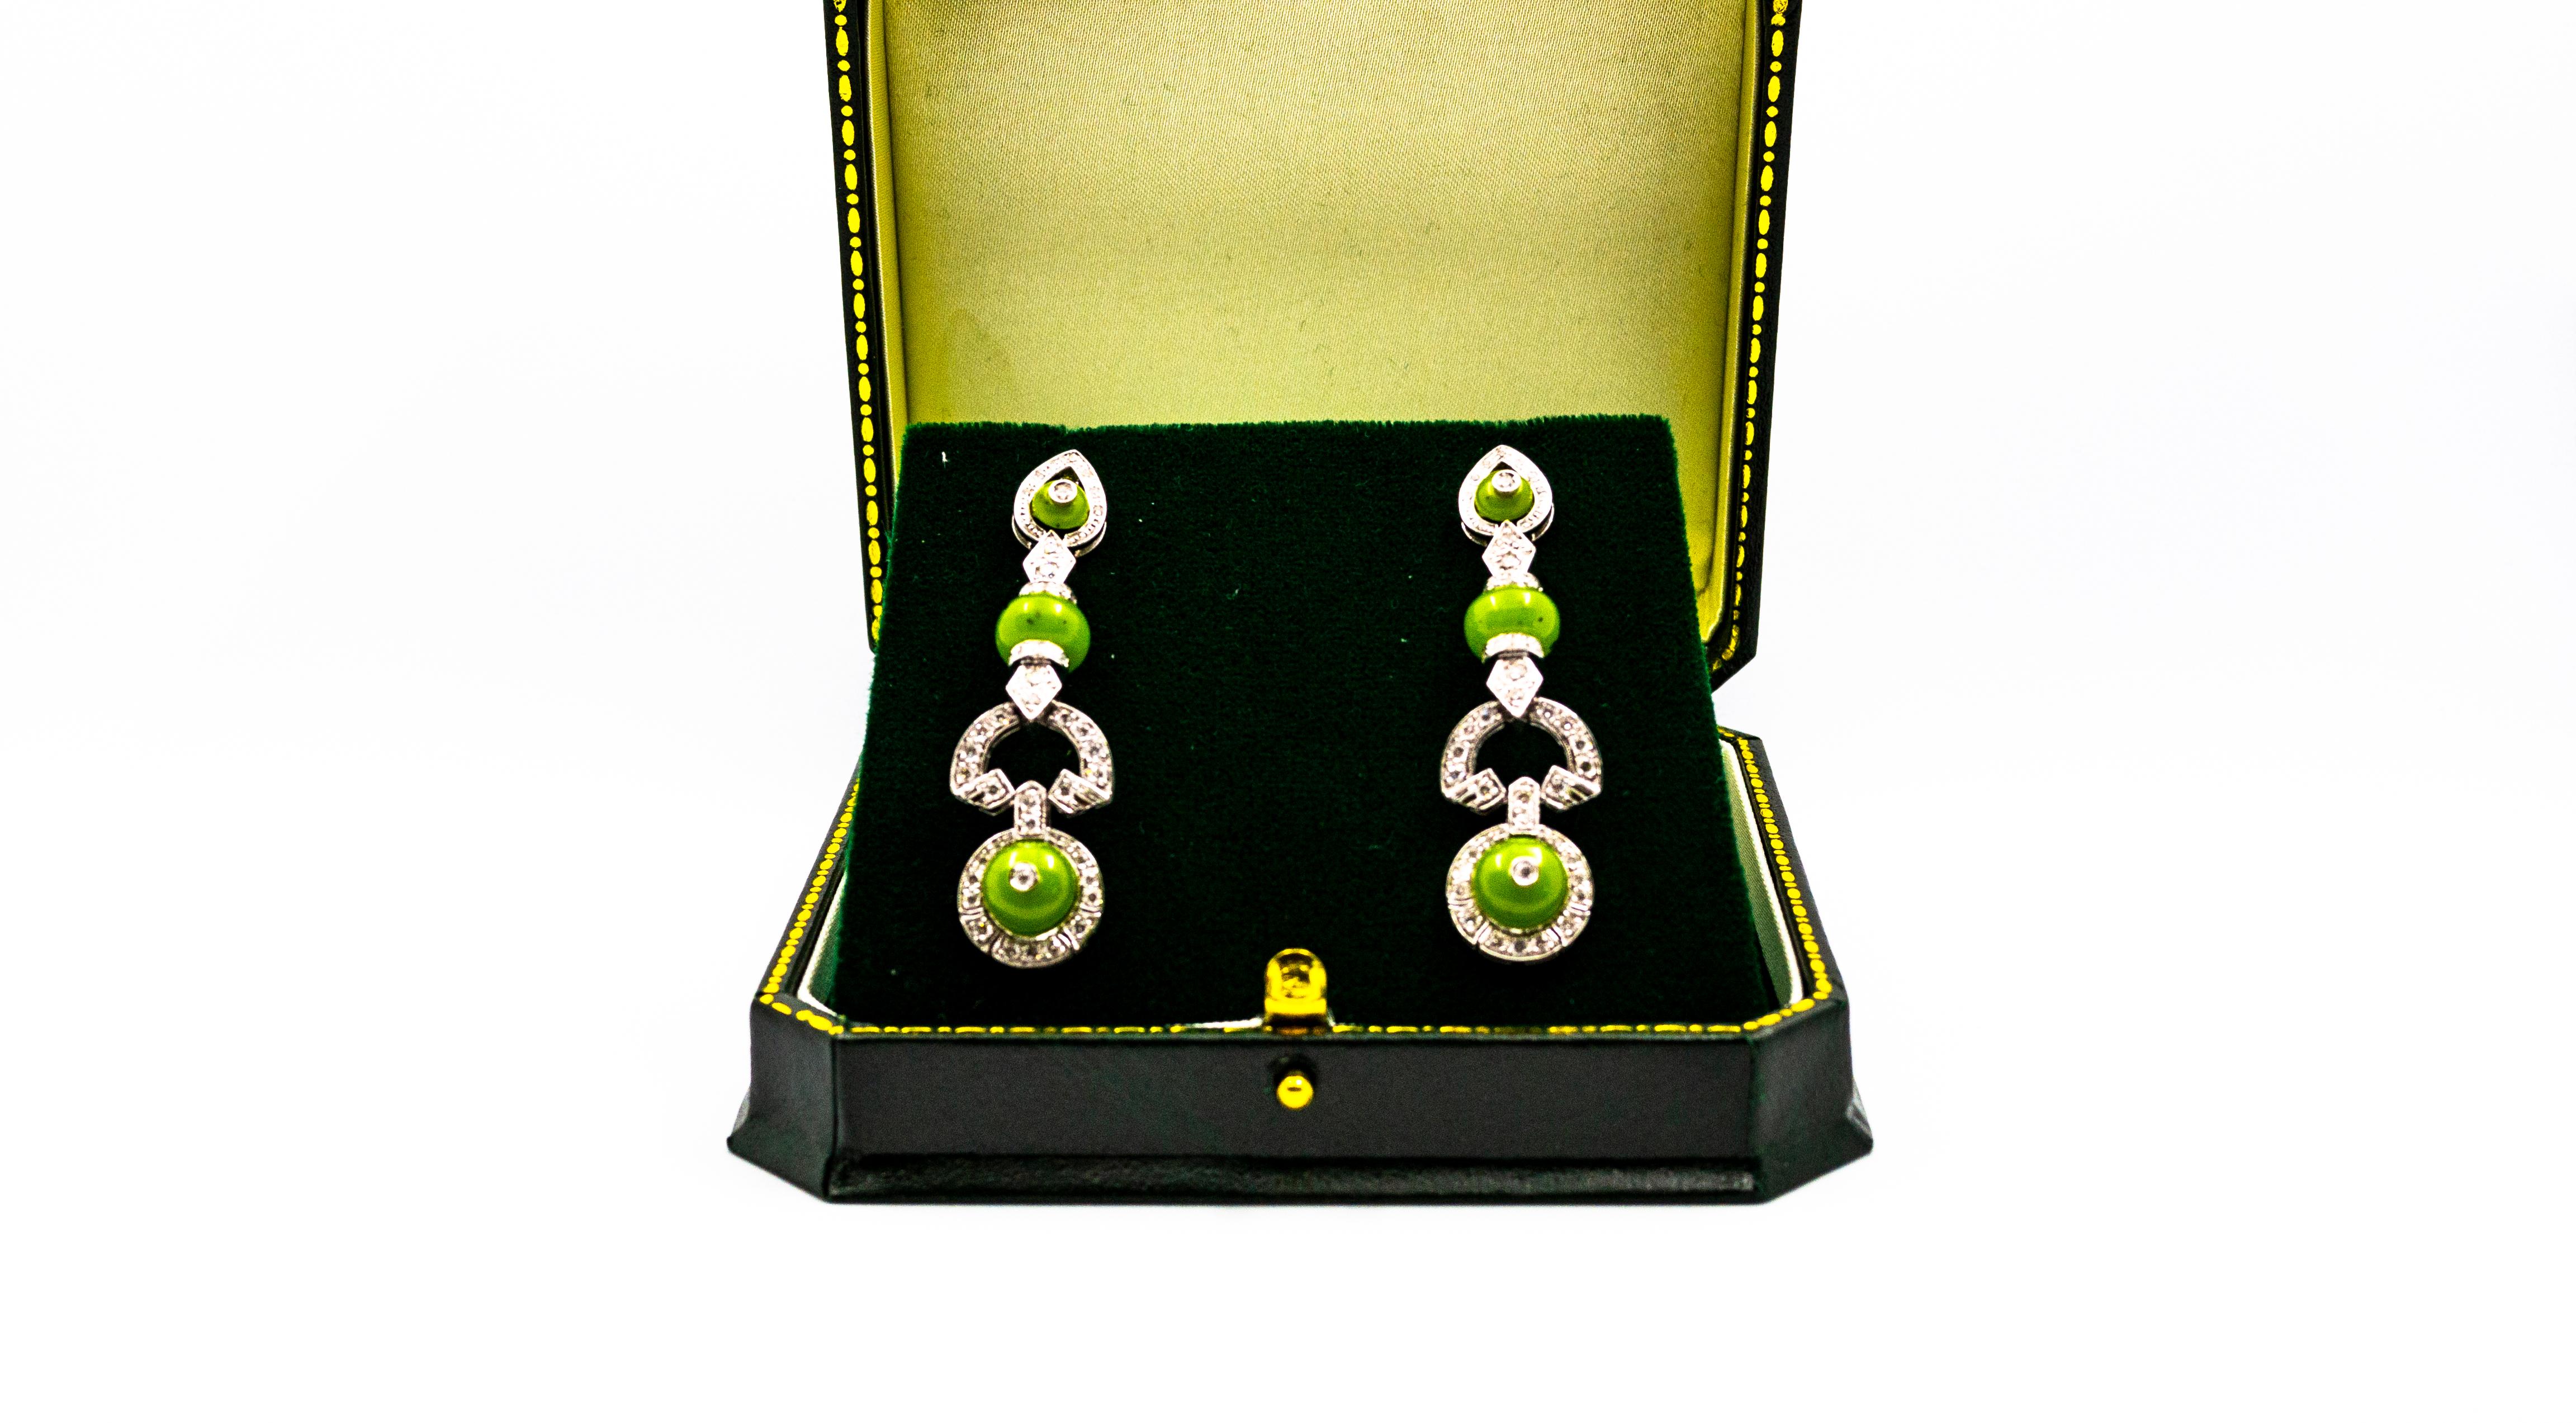 These Earrings are made of 9k White Gold.
These Earrings are available also in 14K or 18K Yellow or White Gold.
These Earrings have 0.55 Carats of White Modern Round Cut Diamonds.
These Earrings have also Jade.
These Earrings are available also with